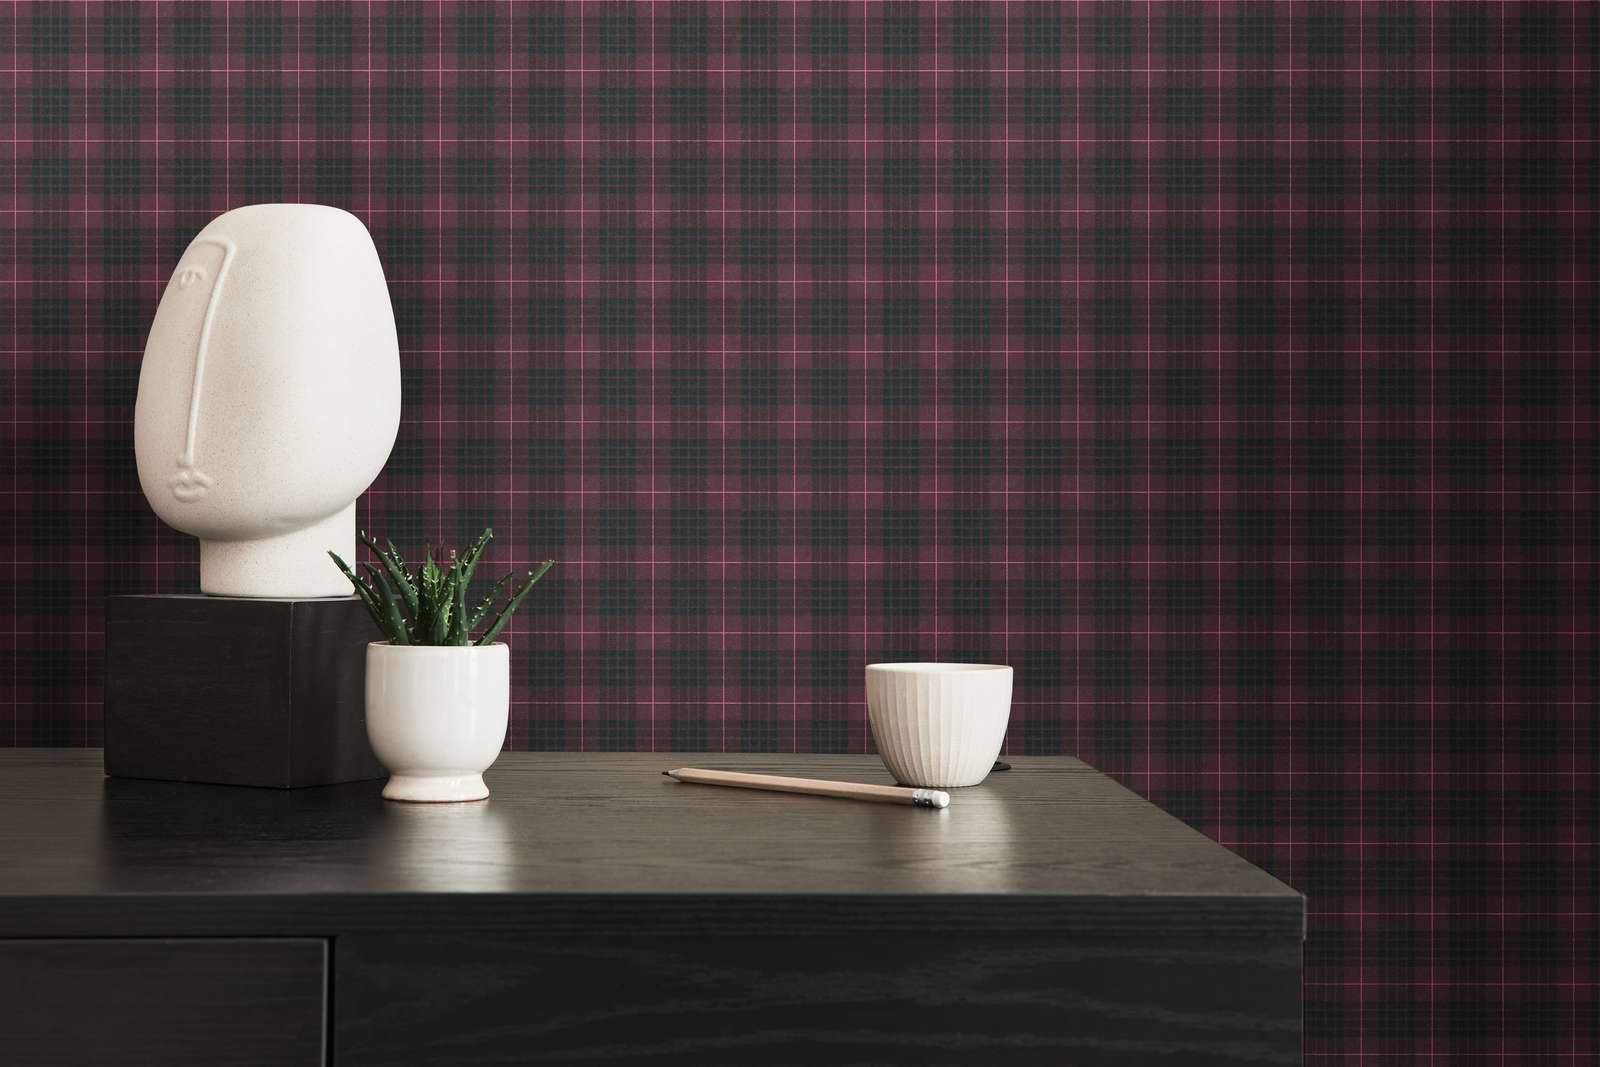             Non-woven wallpaper with fabric look chequered flannel look - red, black
        